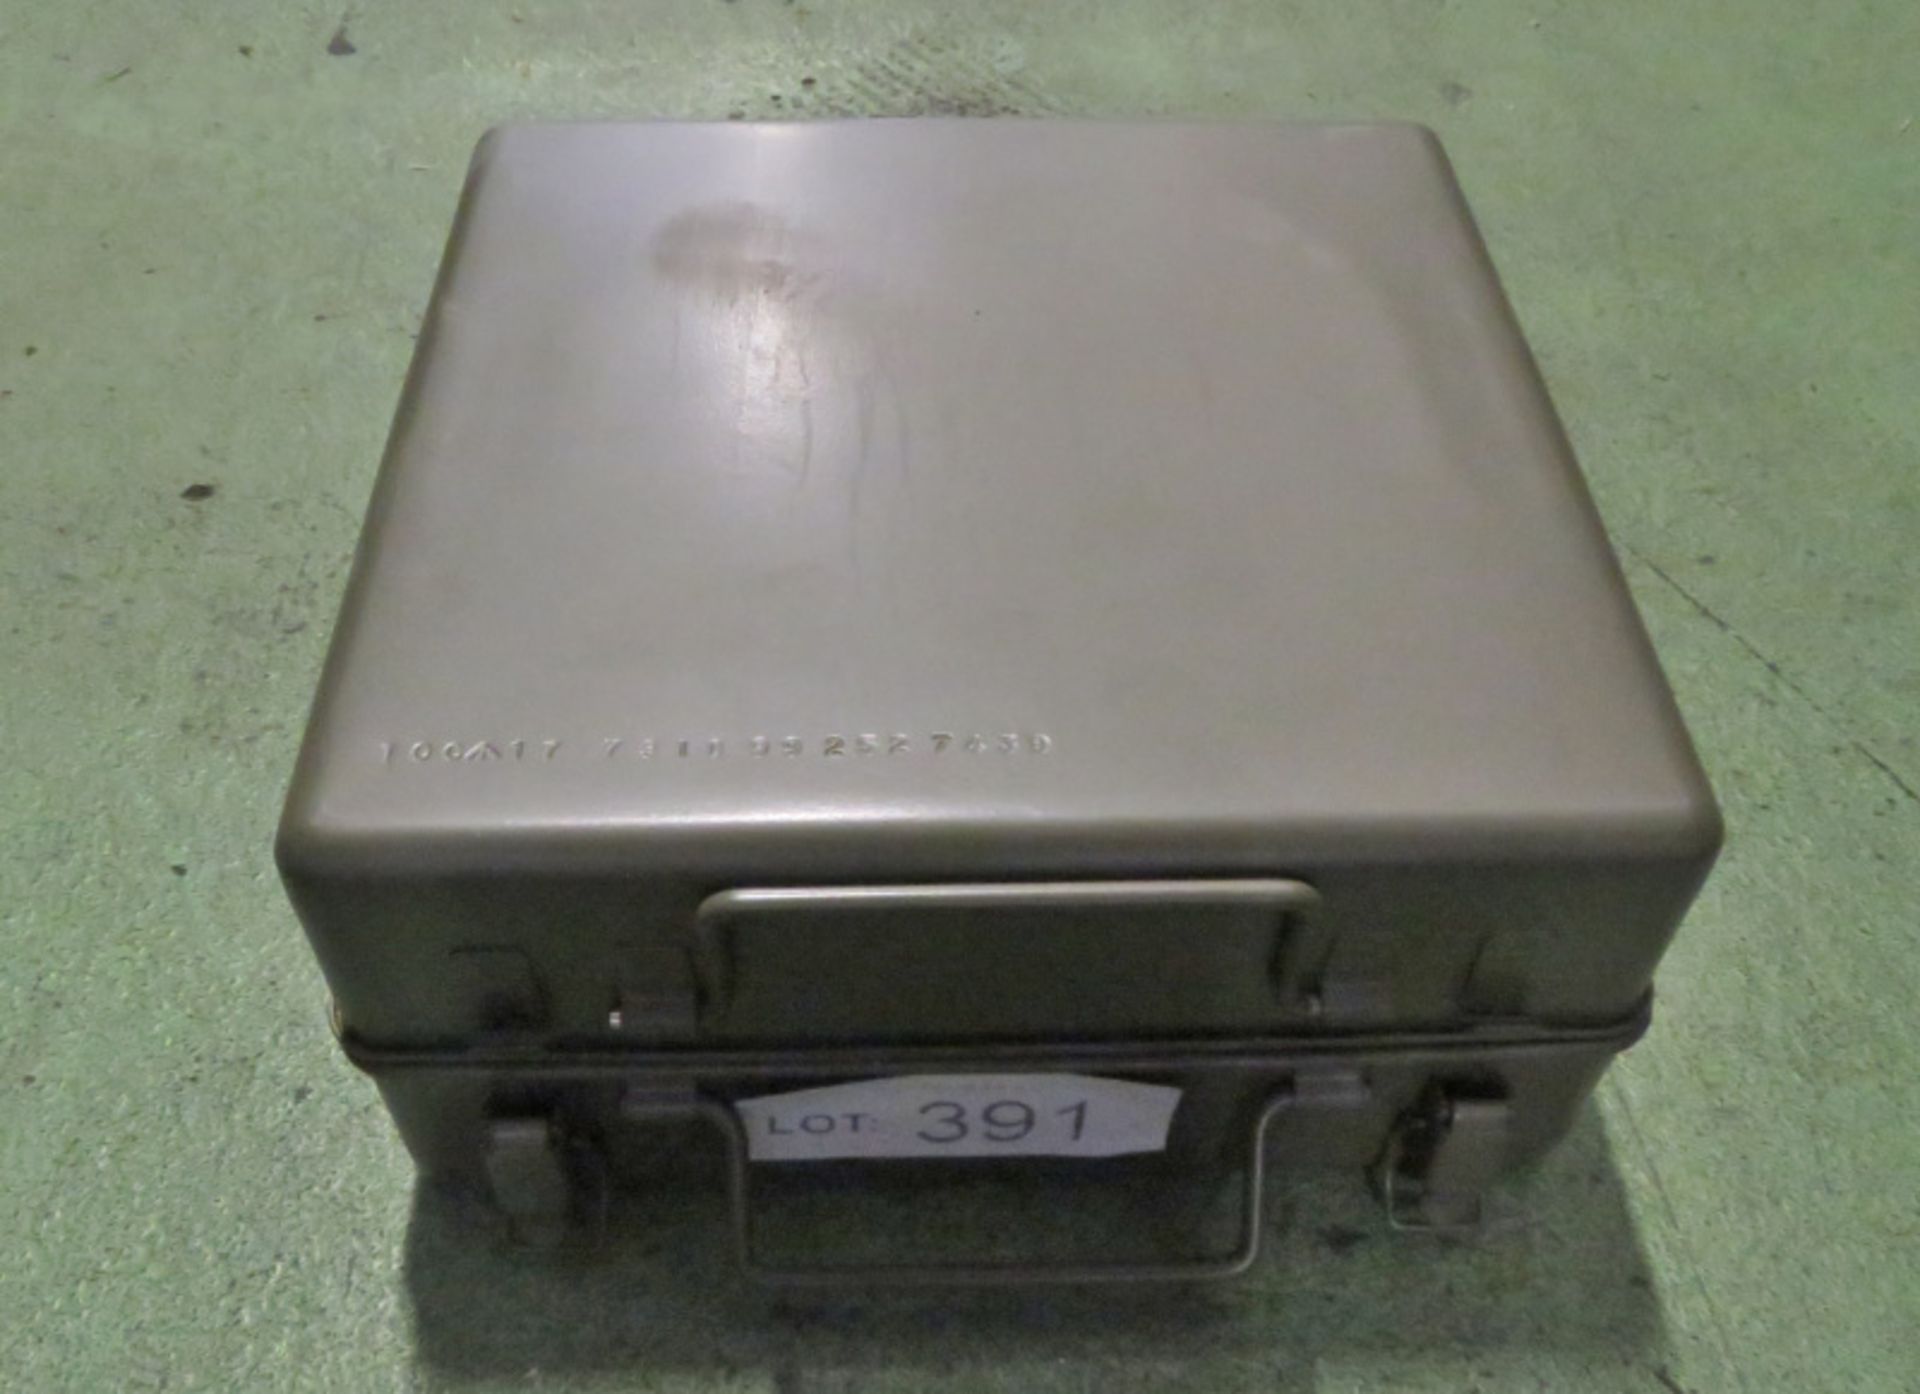 T.O.C No.12 Small Fuel Cooking Stove - Image 3 of 3